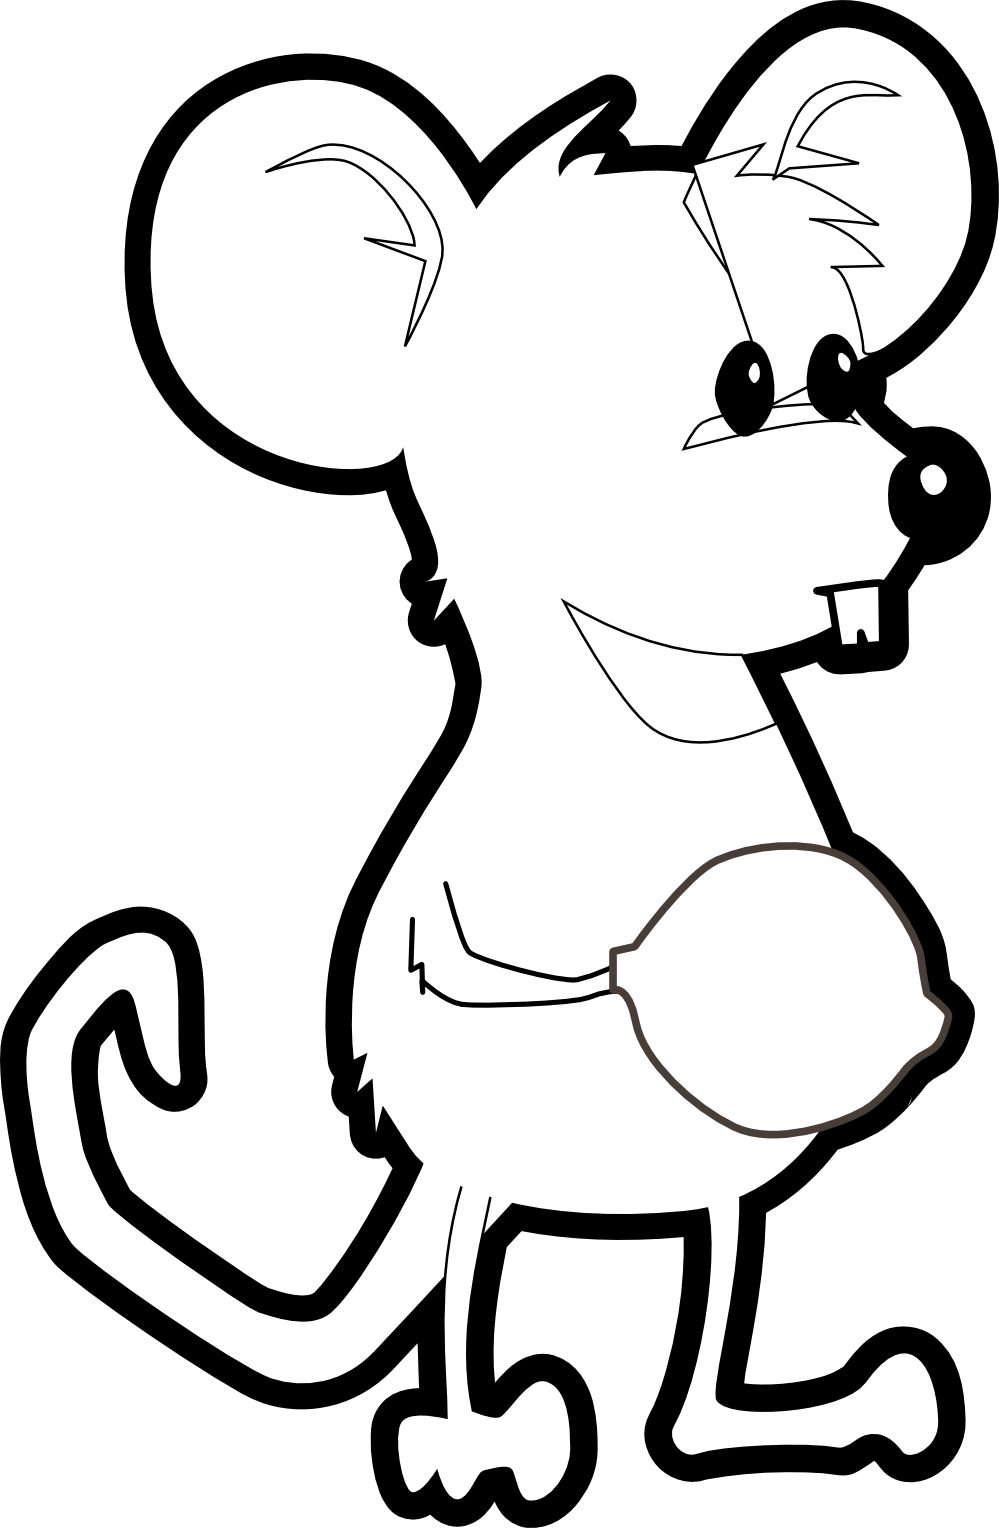 Free Rat Clipart Black And White, Download Free Rat Clipart Black And